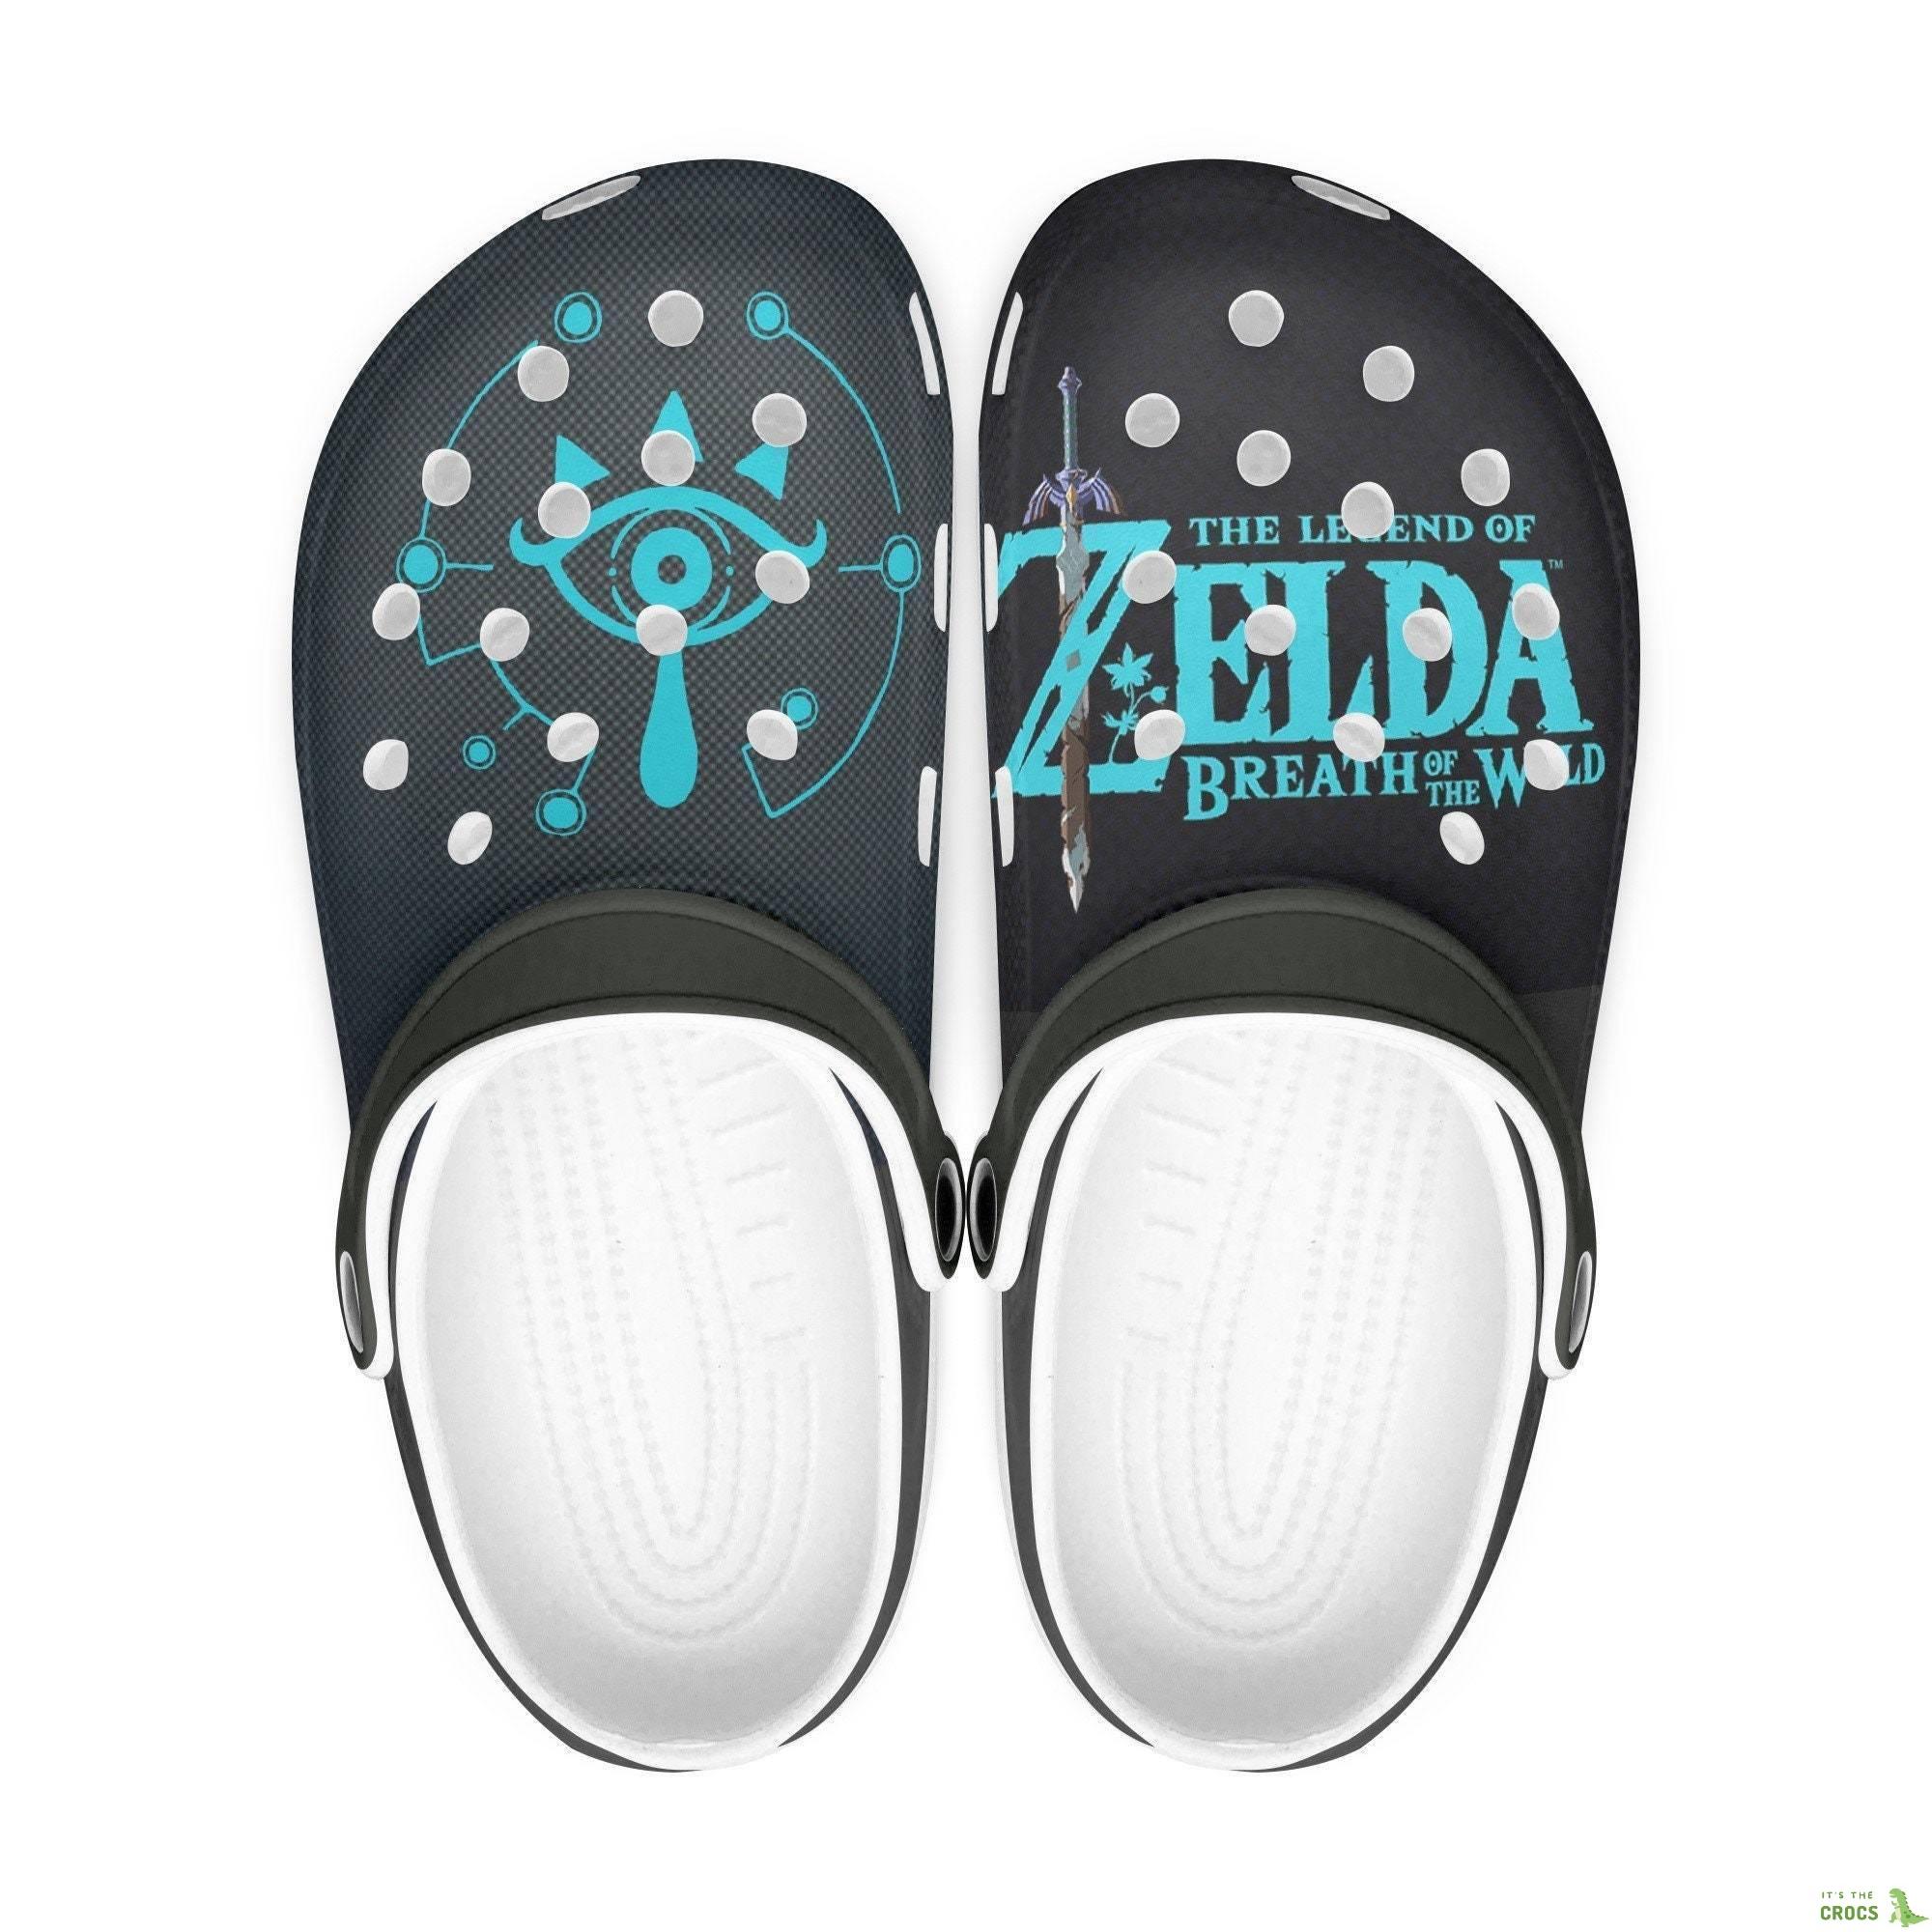 Get your gaming fix with these Legend of Zelda clogs – perfect for indoor and outdoor adventures